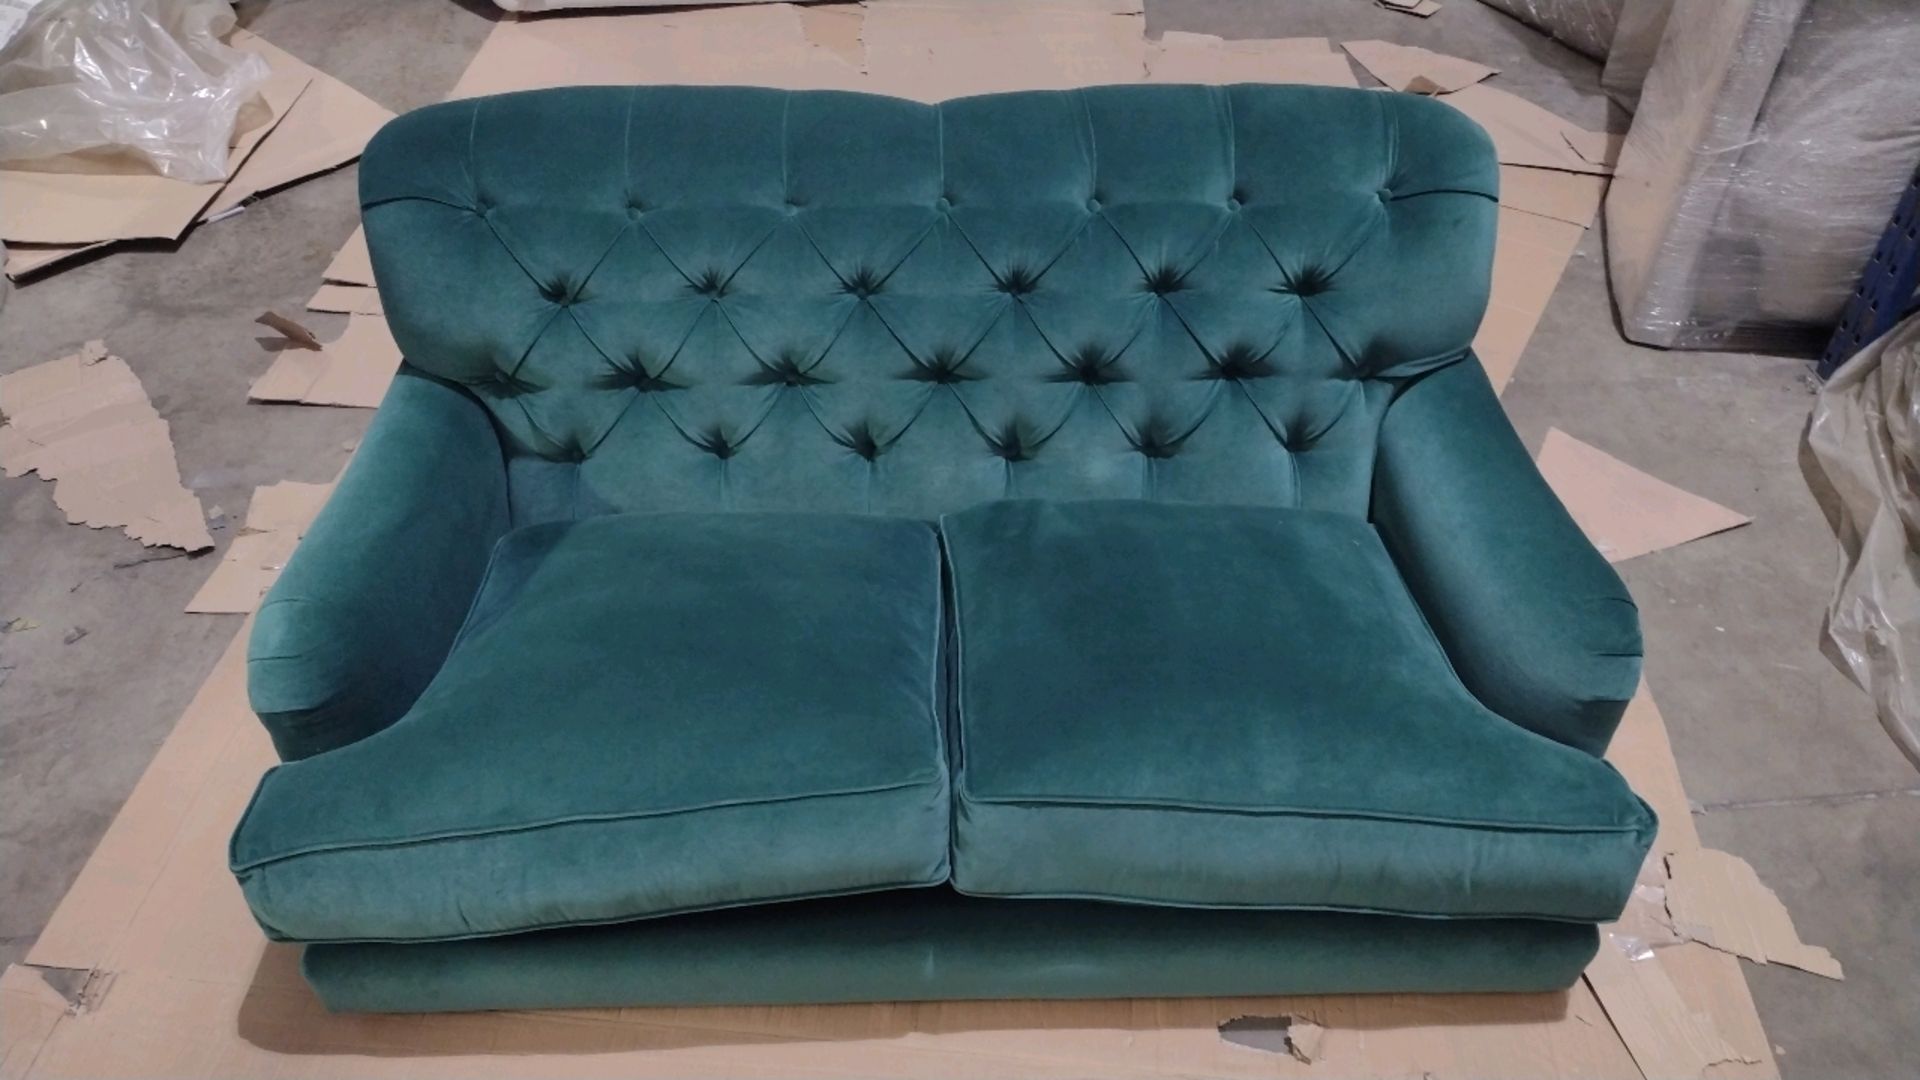 Snowdrop Button Back 2 Seat Sofa In Jade Smart Velvet RRP - £1890 - Image 5 of 9